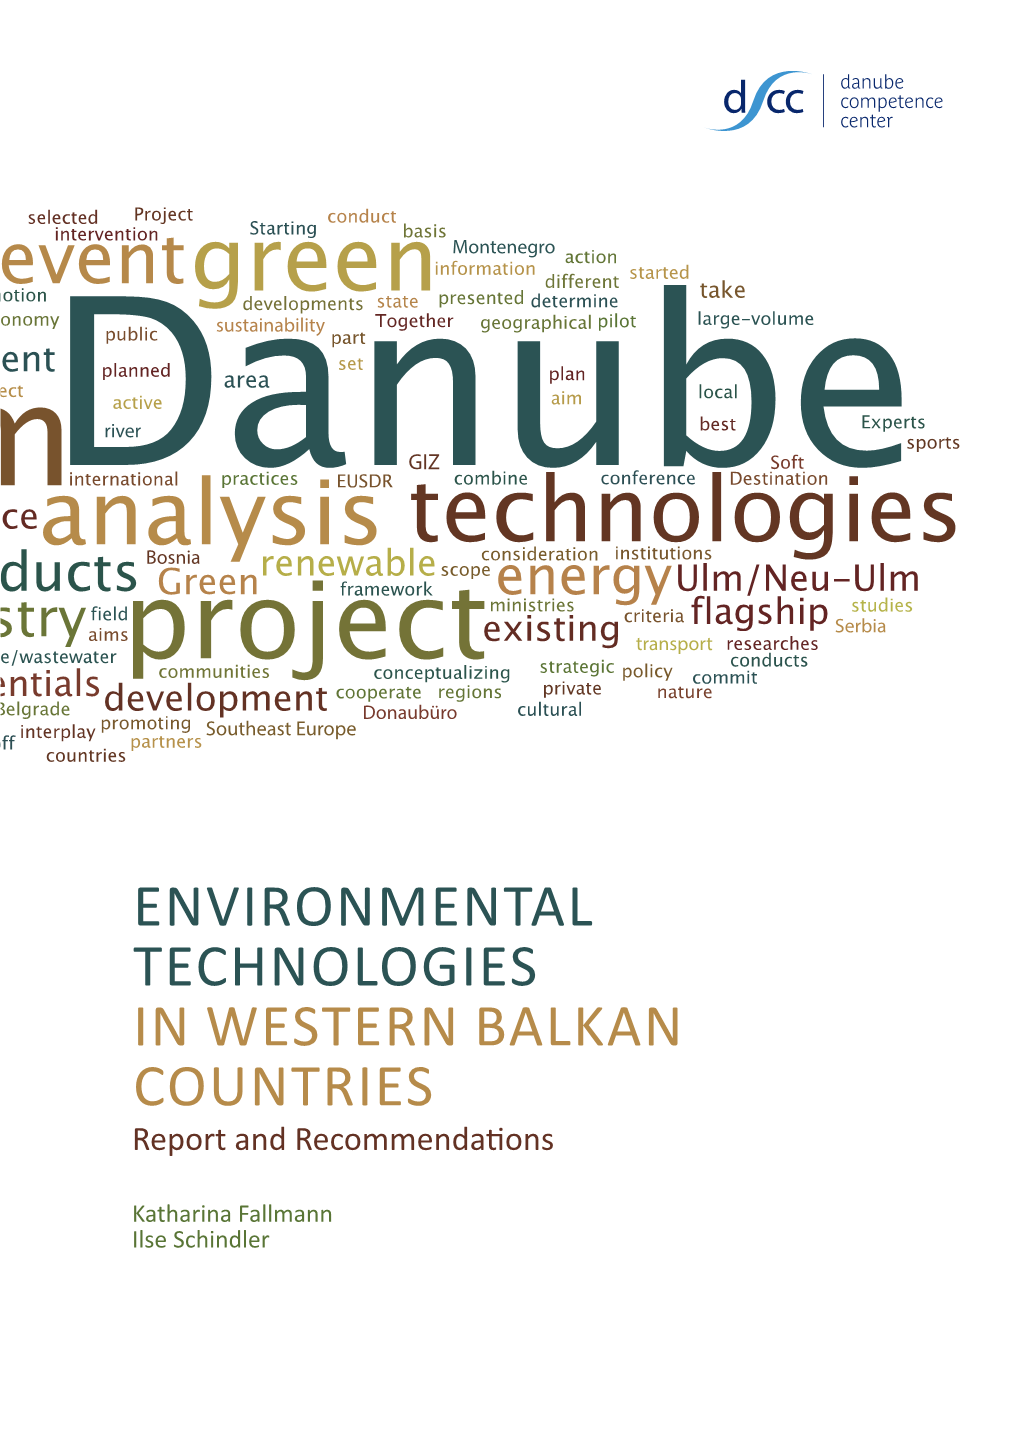 Environmental Technologies in Western Balkan Countries Report and Recommendations